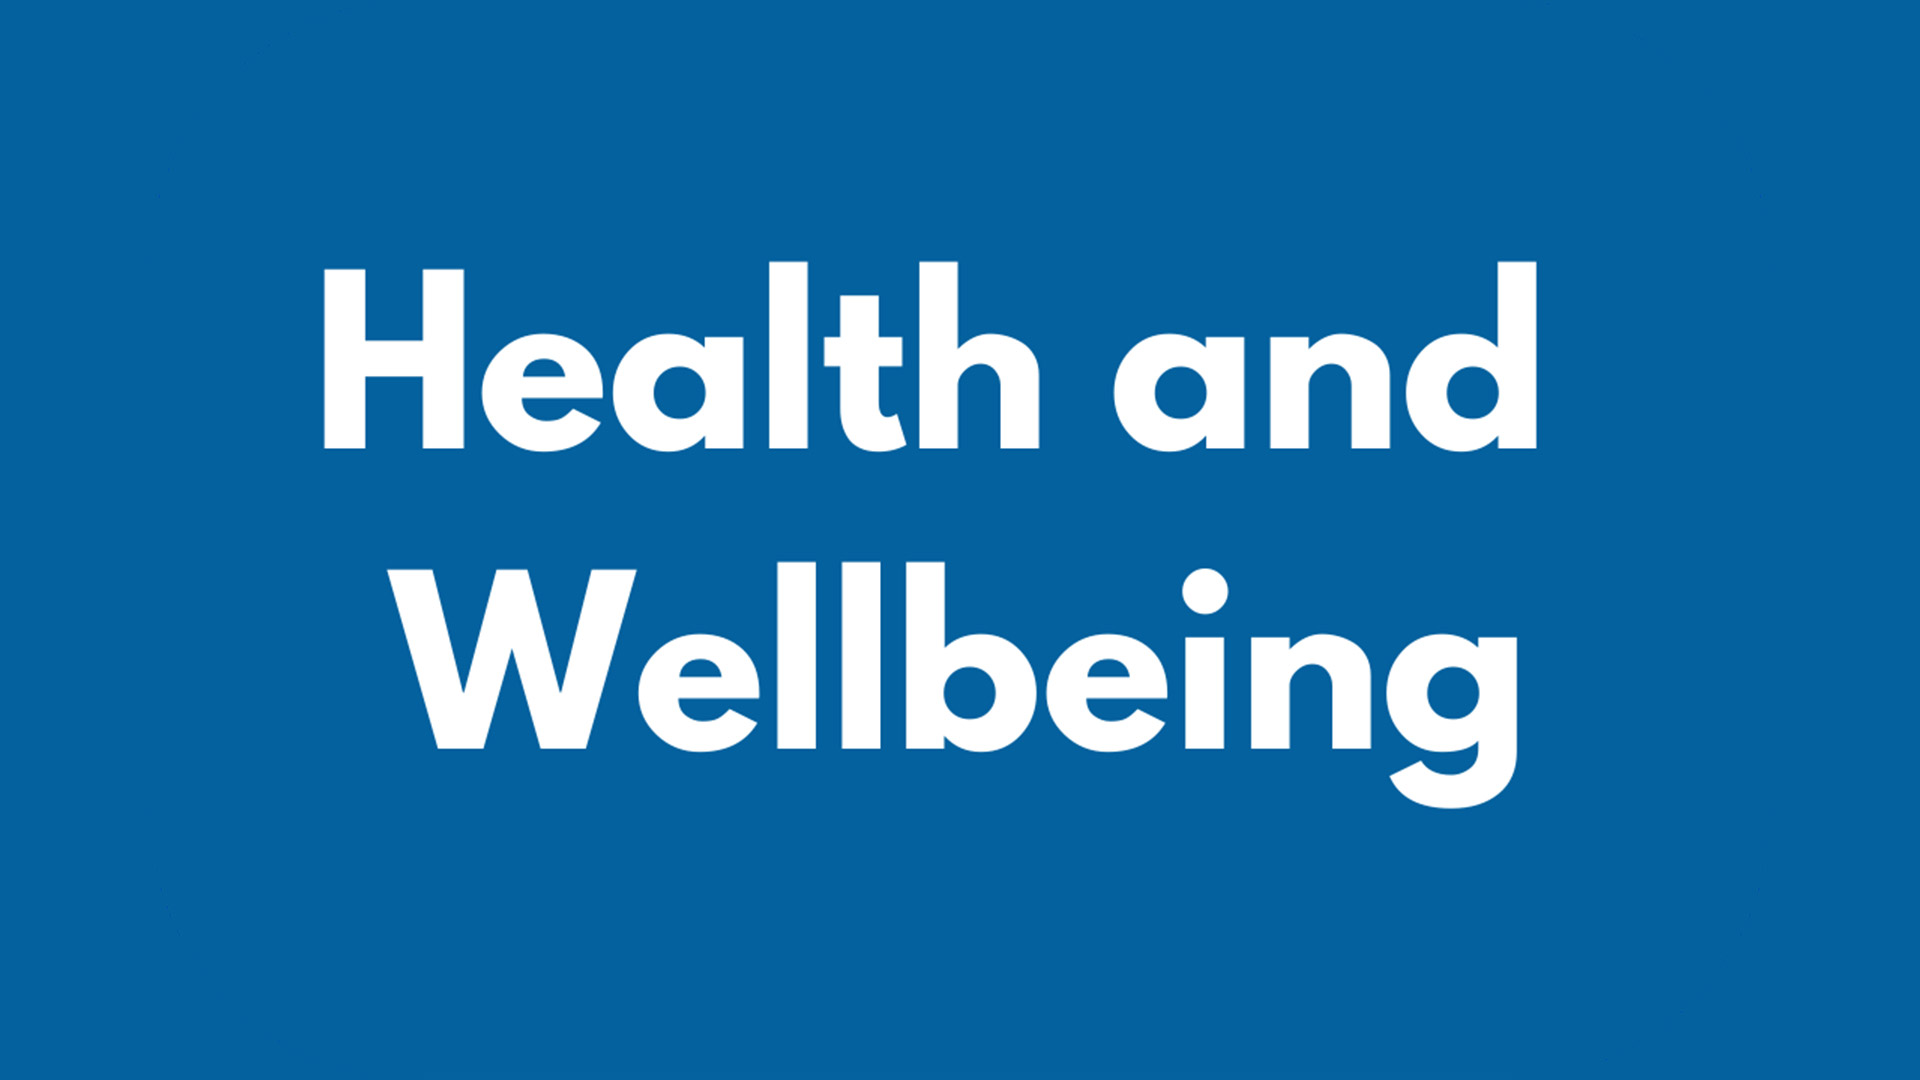 health and wellbeing text graphic